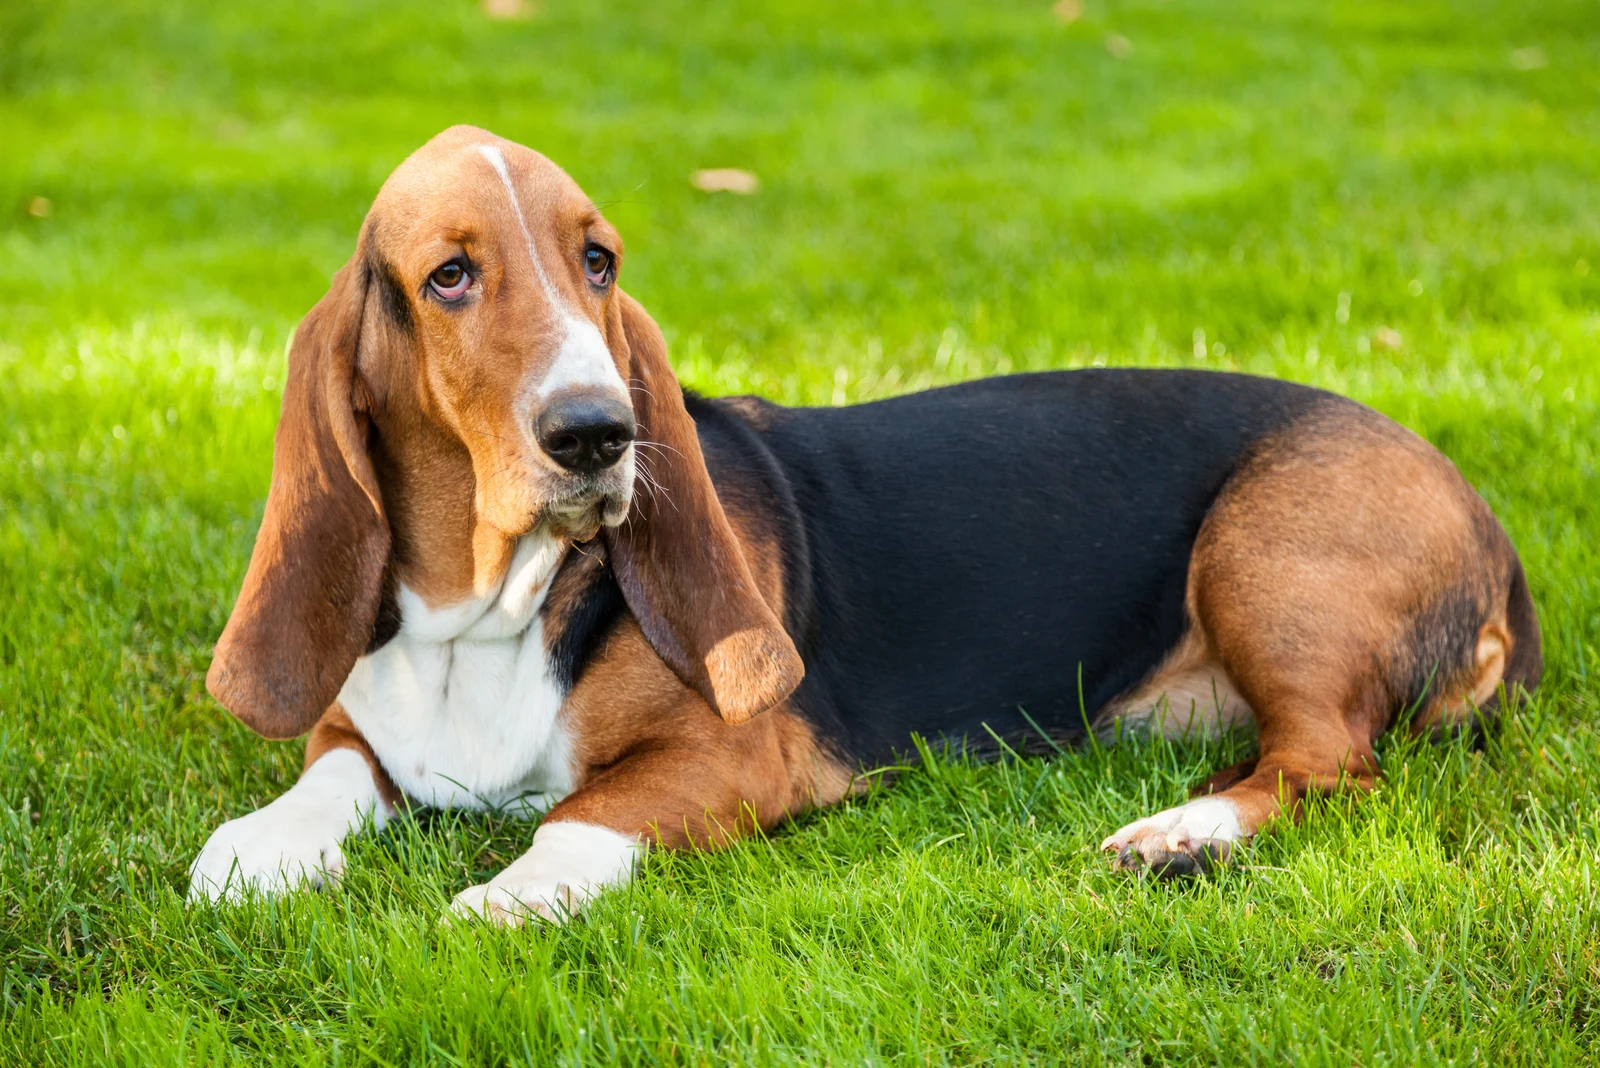 Basset Hound is lying on the grass